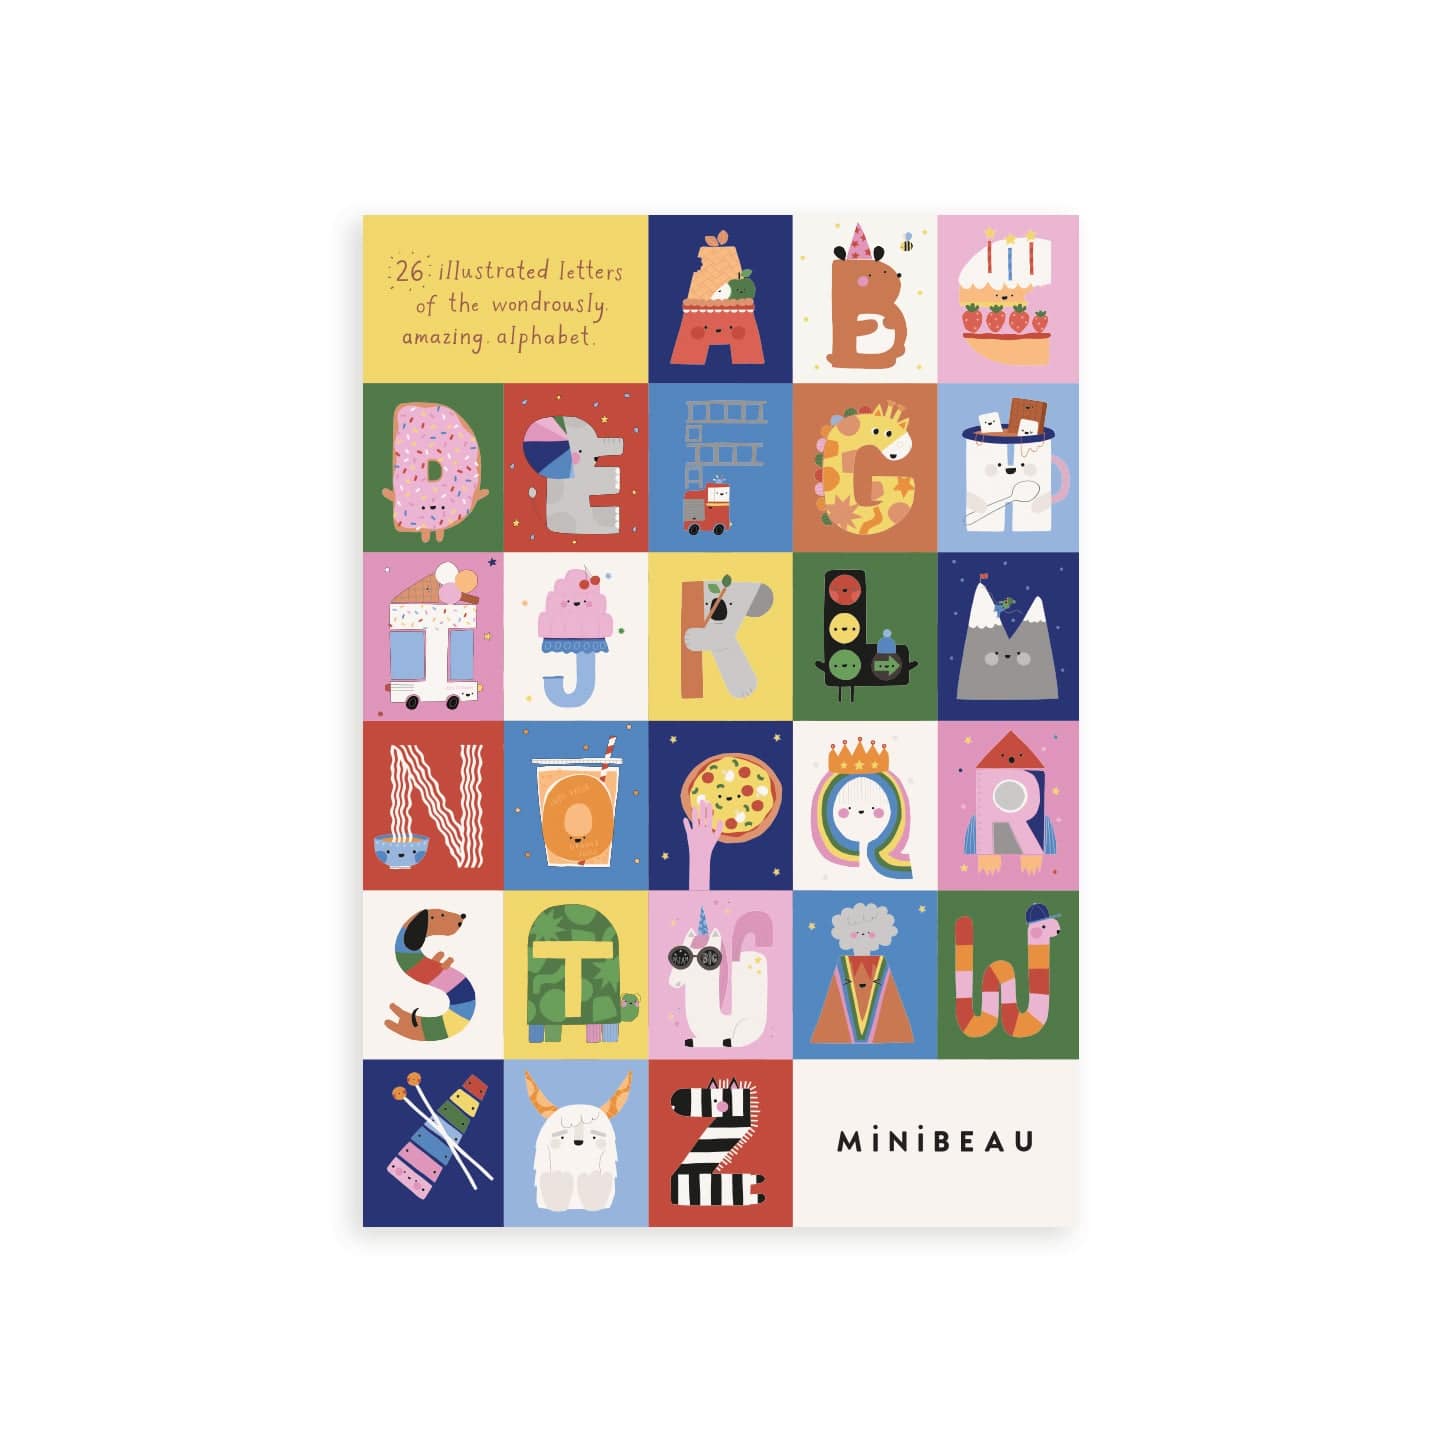 Our Happy Alphabet Art Print shows all of our Happy Alphabet letters in alphabet form, with EVERY DAY IS A CHANCE TO LEARN in white in a yellow square in the top left, and Minibeau in black in a white square in the bottom right.